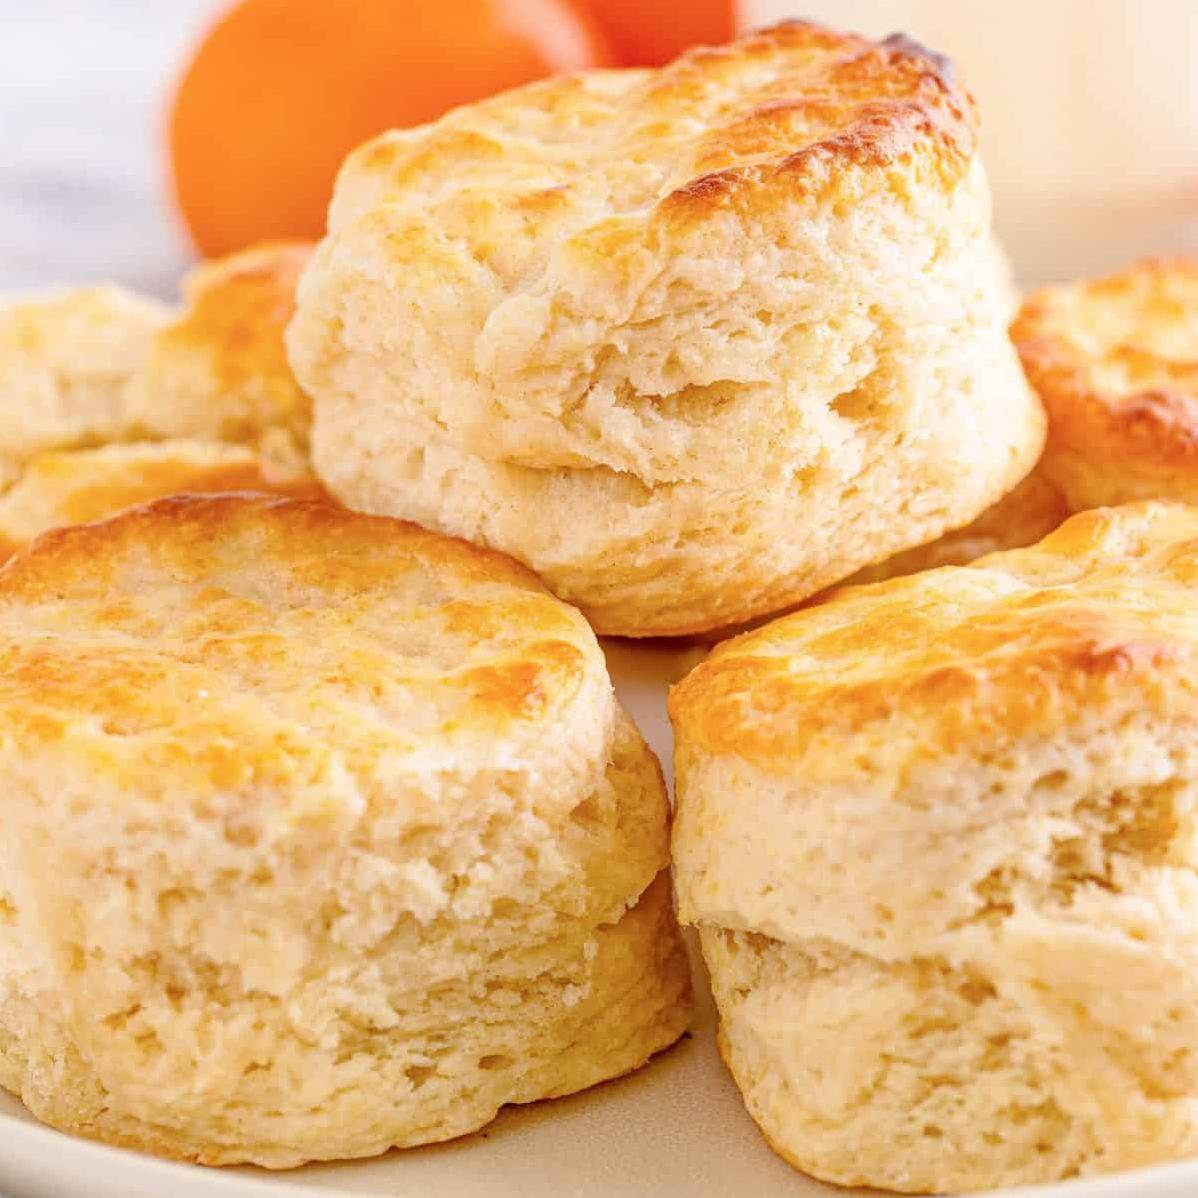  Homemade biscuits that are light and flaky on the inside